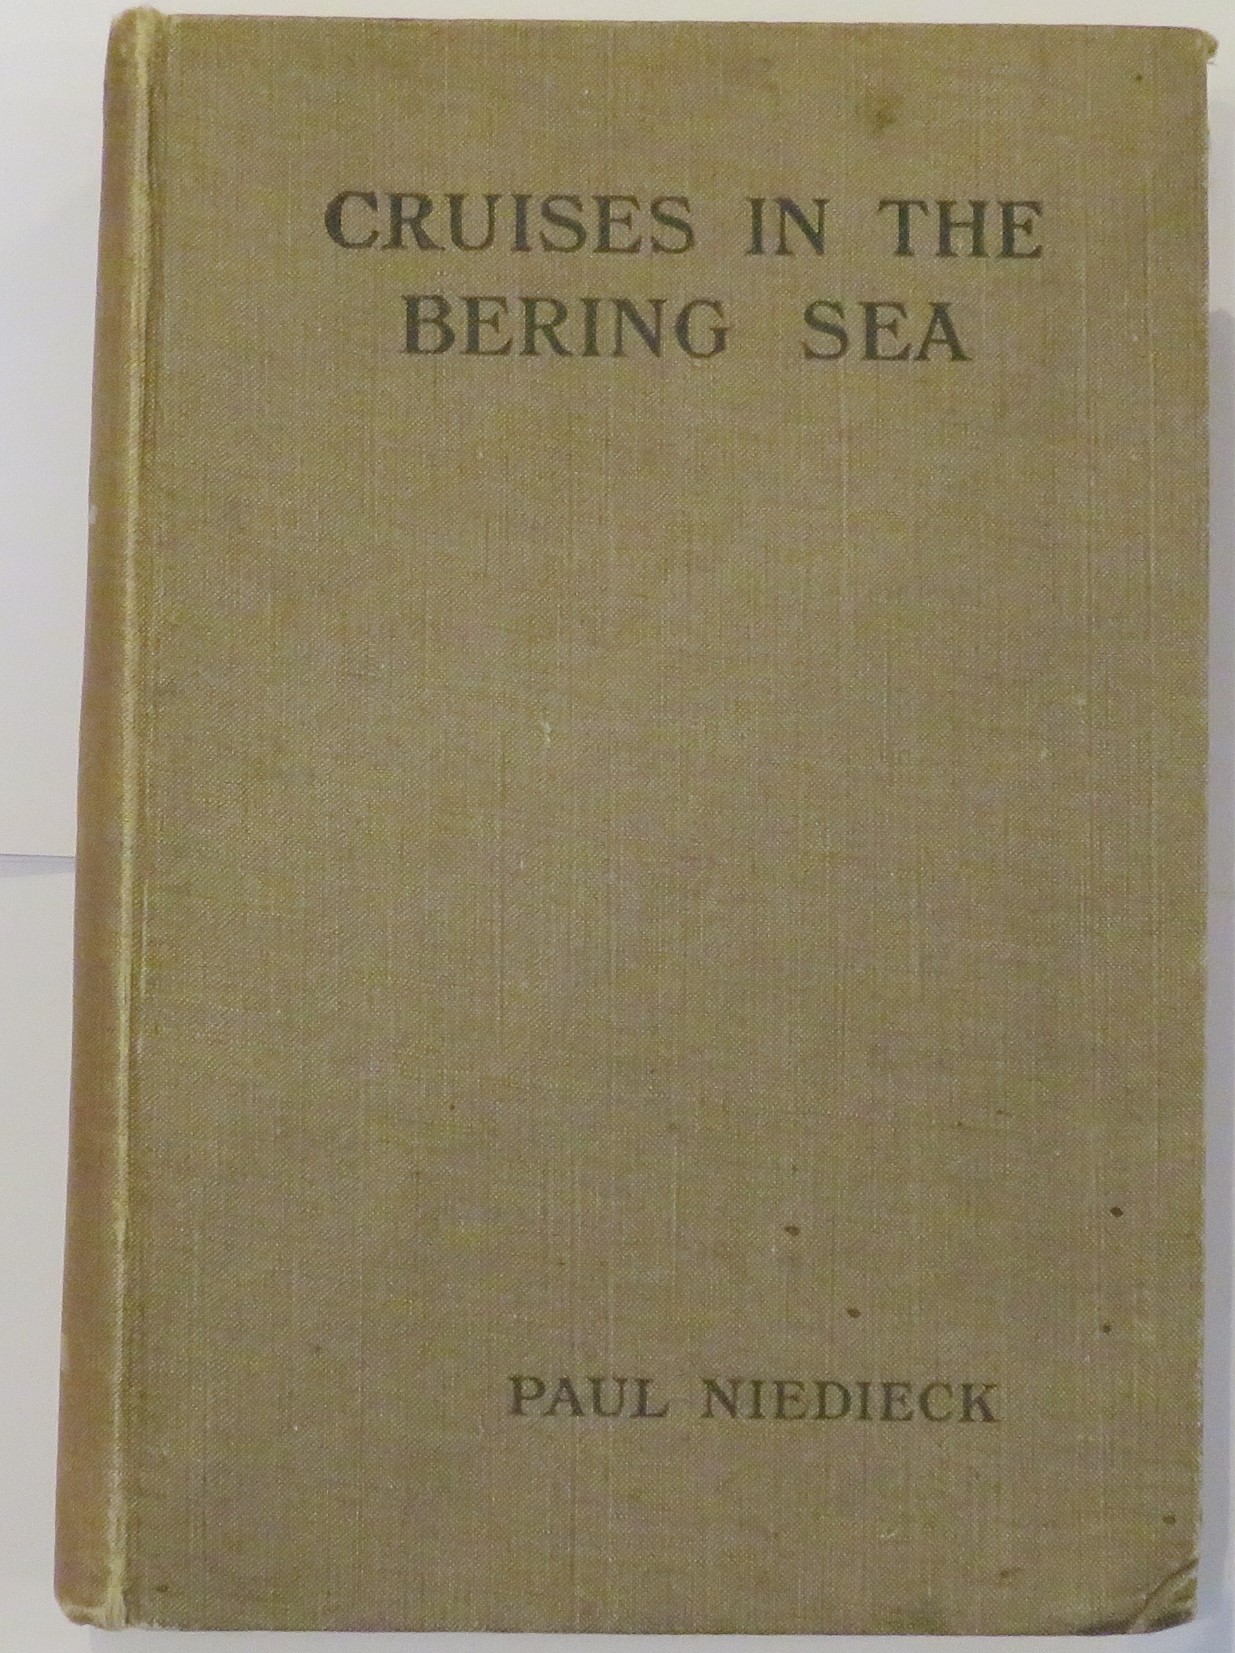 Cruises in the Bering Sea First Edition